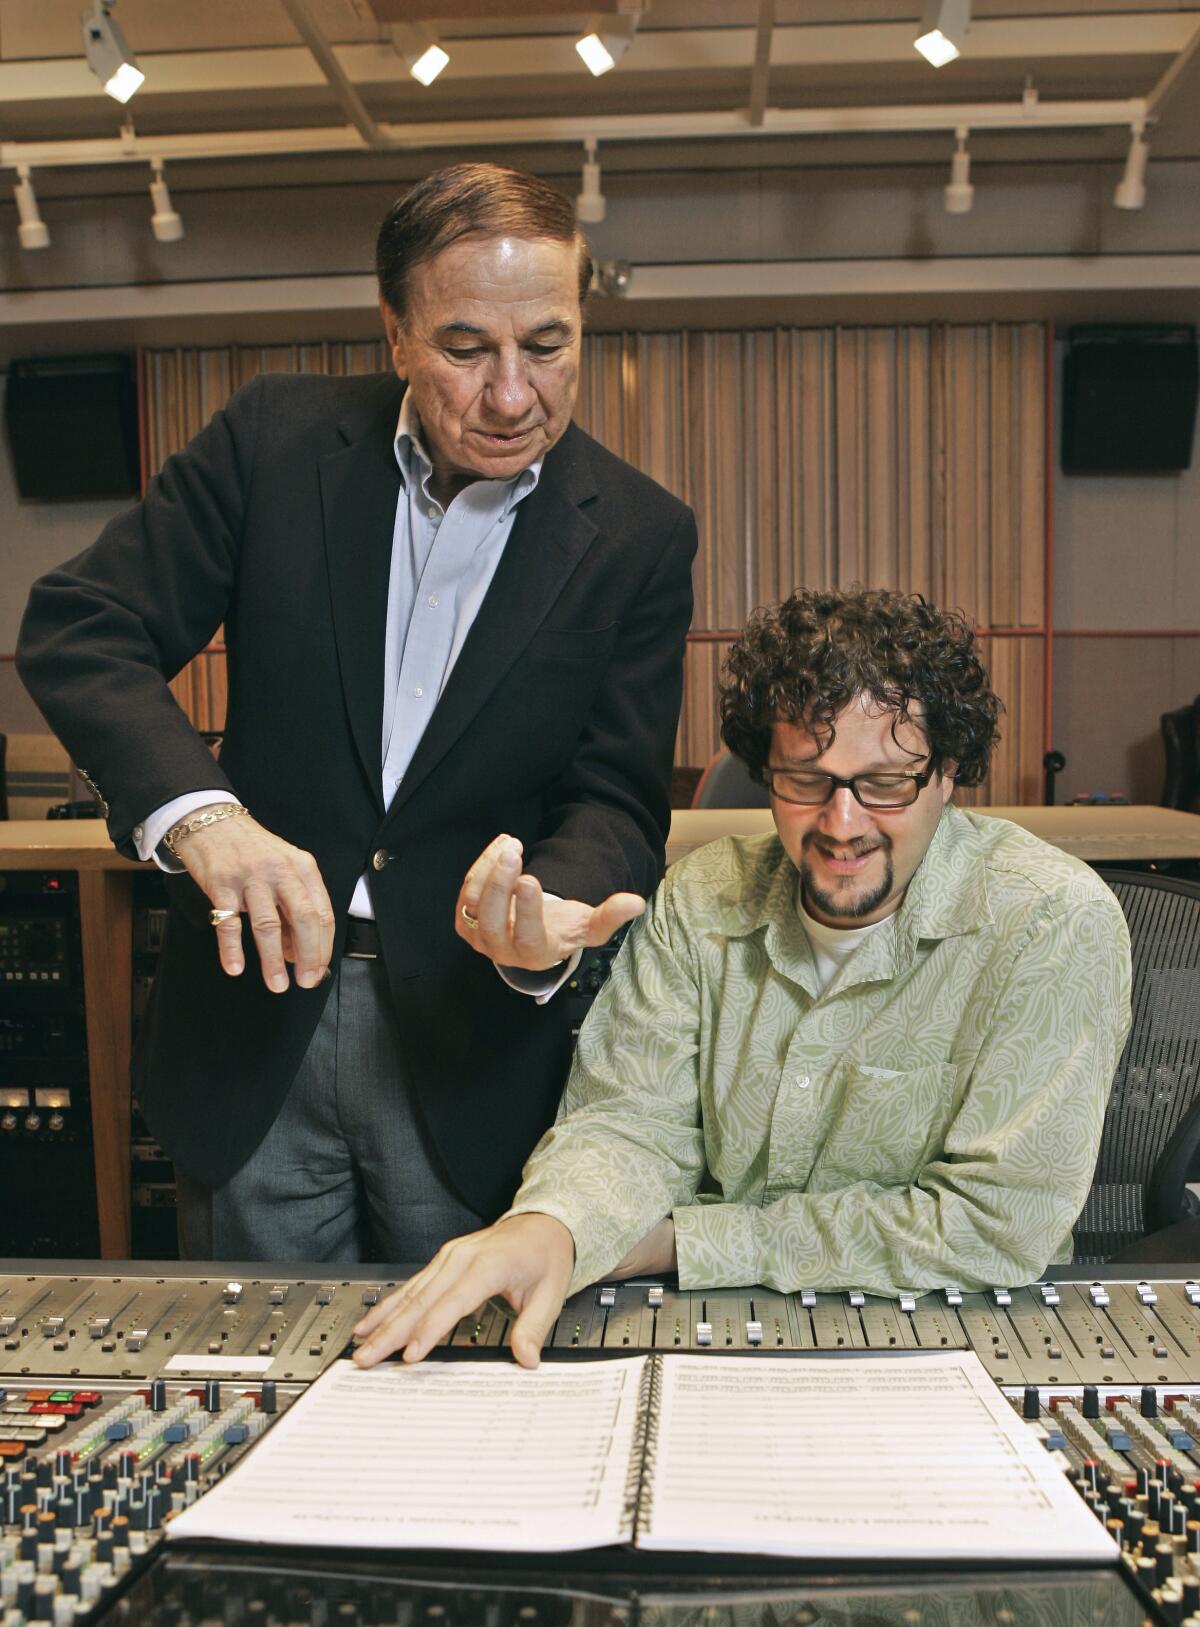 A man in a suit stands next to a seated man as they look at a musical score in a recording studio